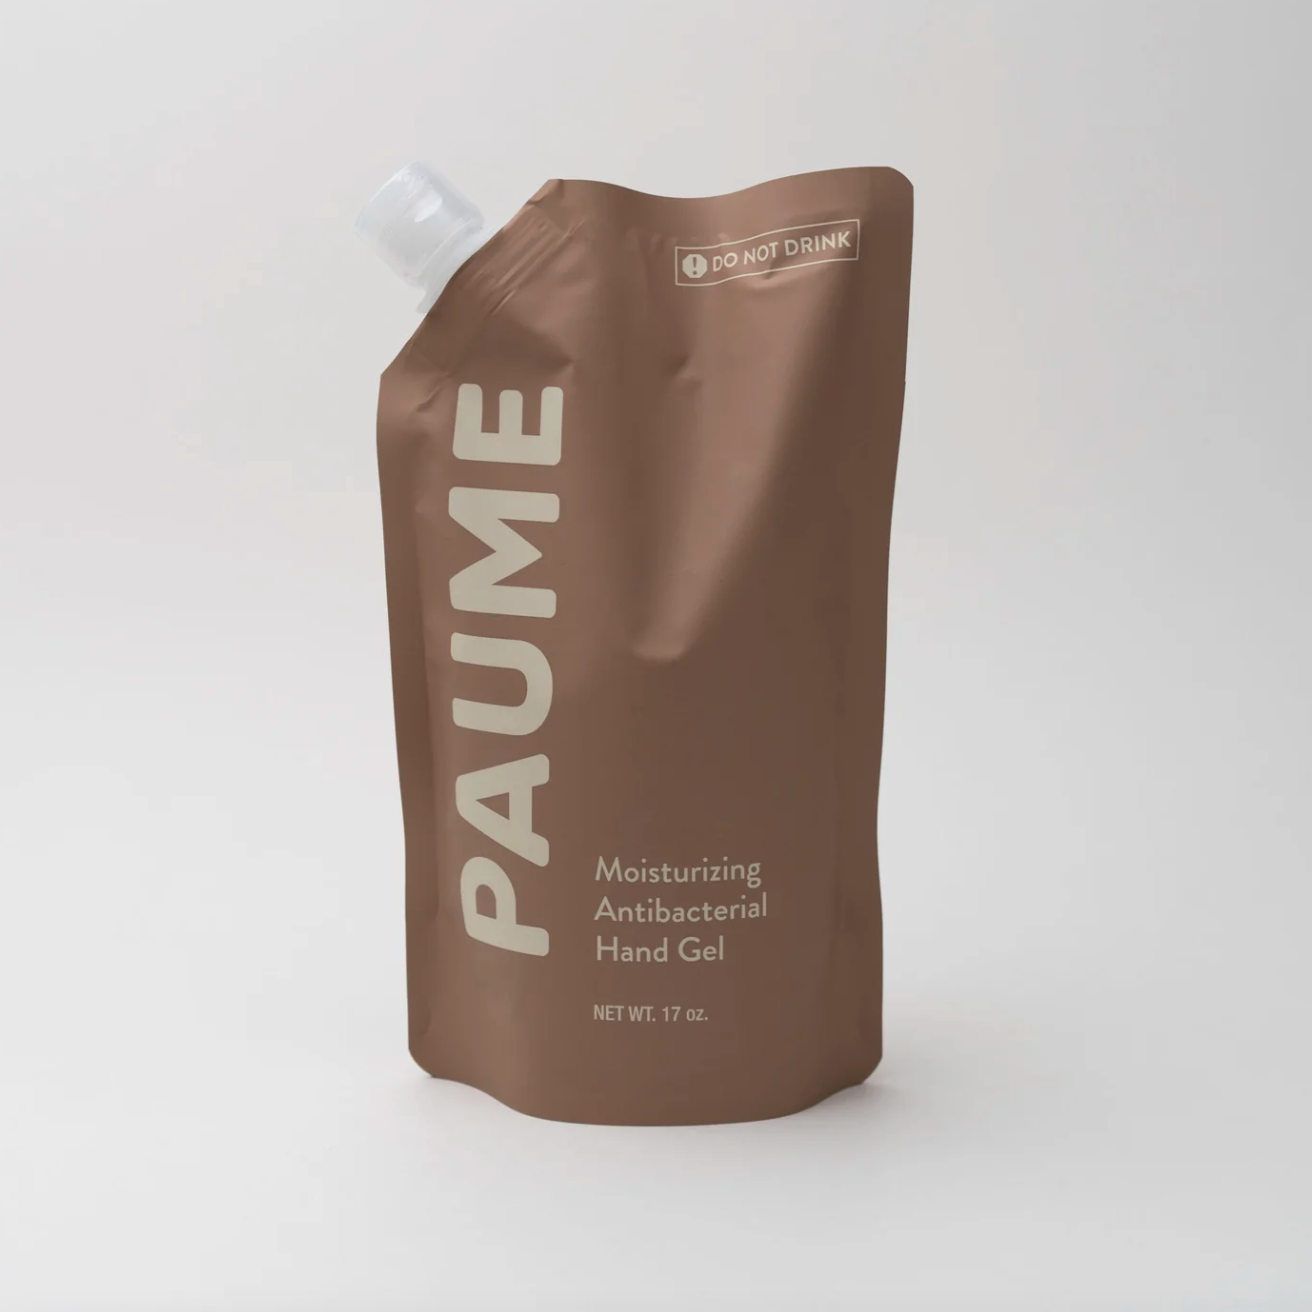 PAUME Hand Sanitizer - Refill Bag